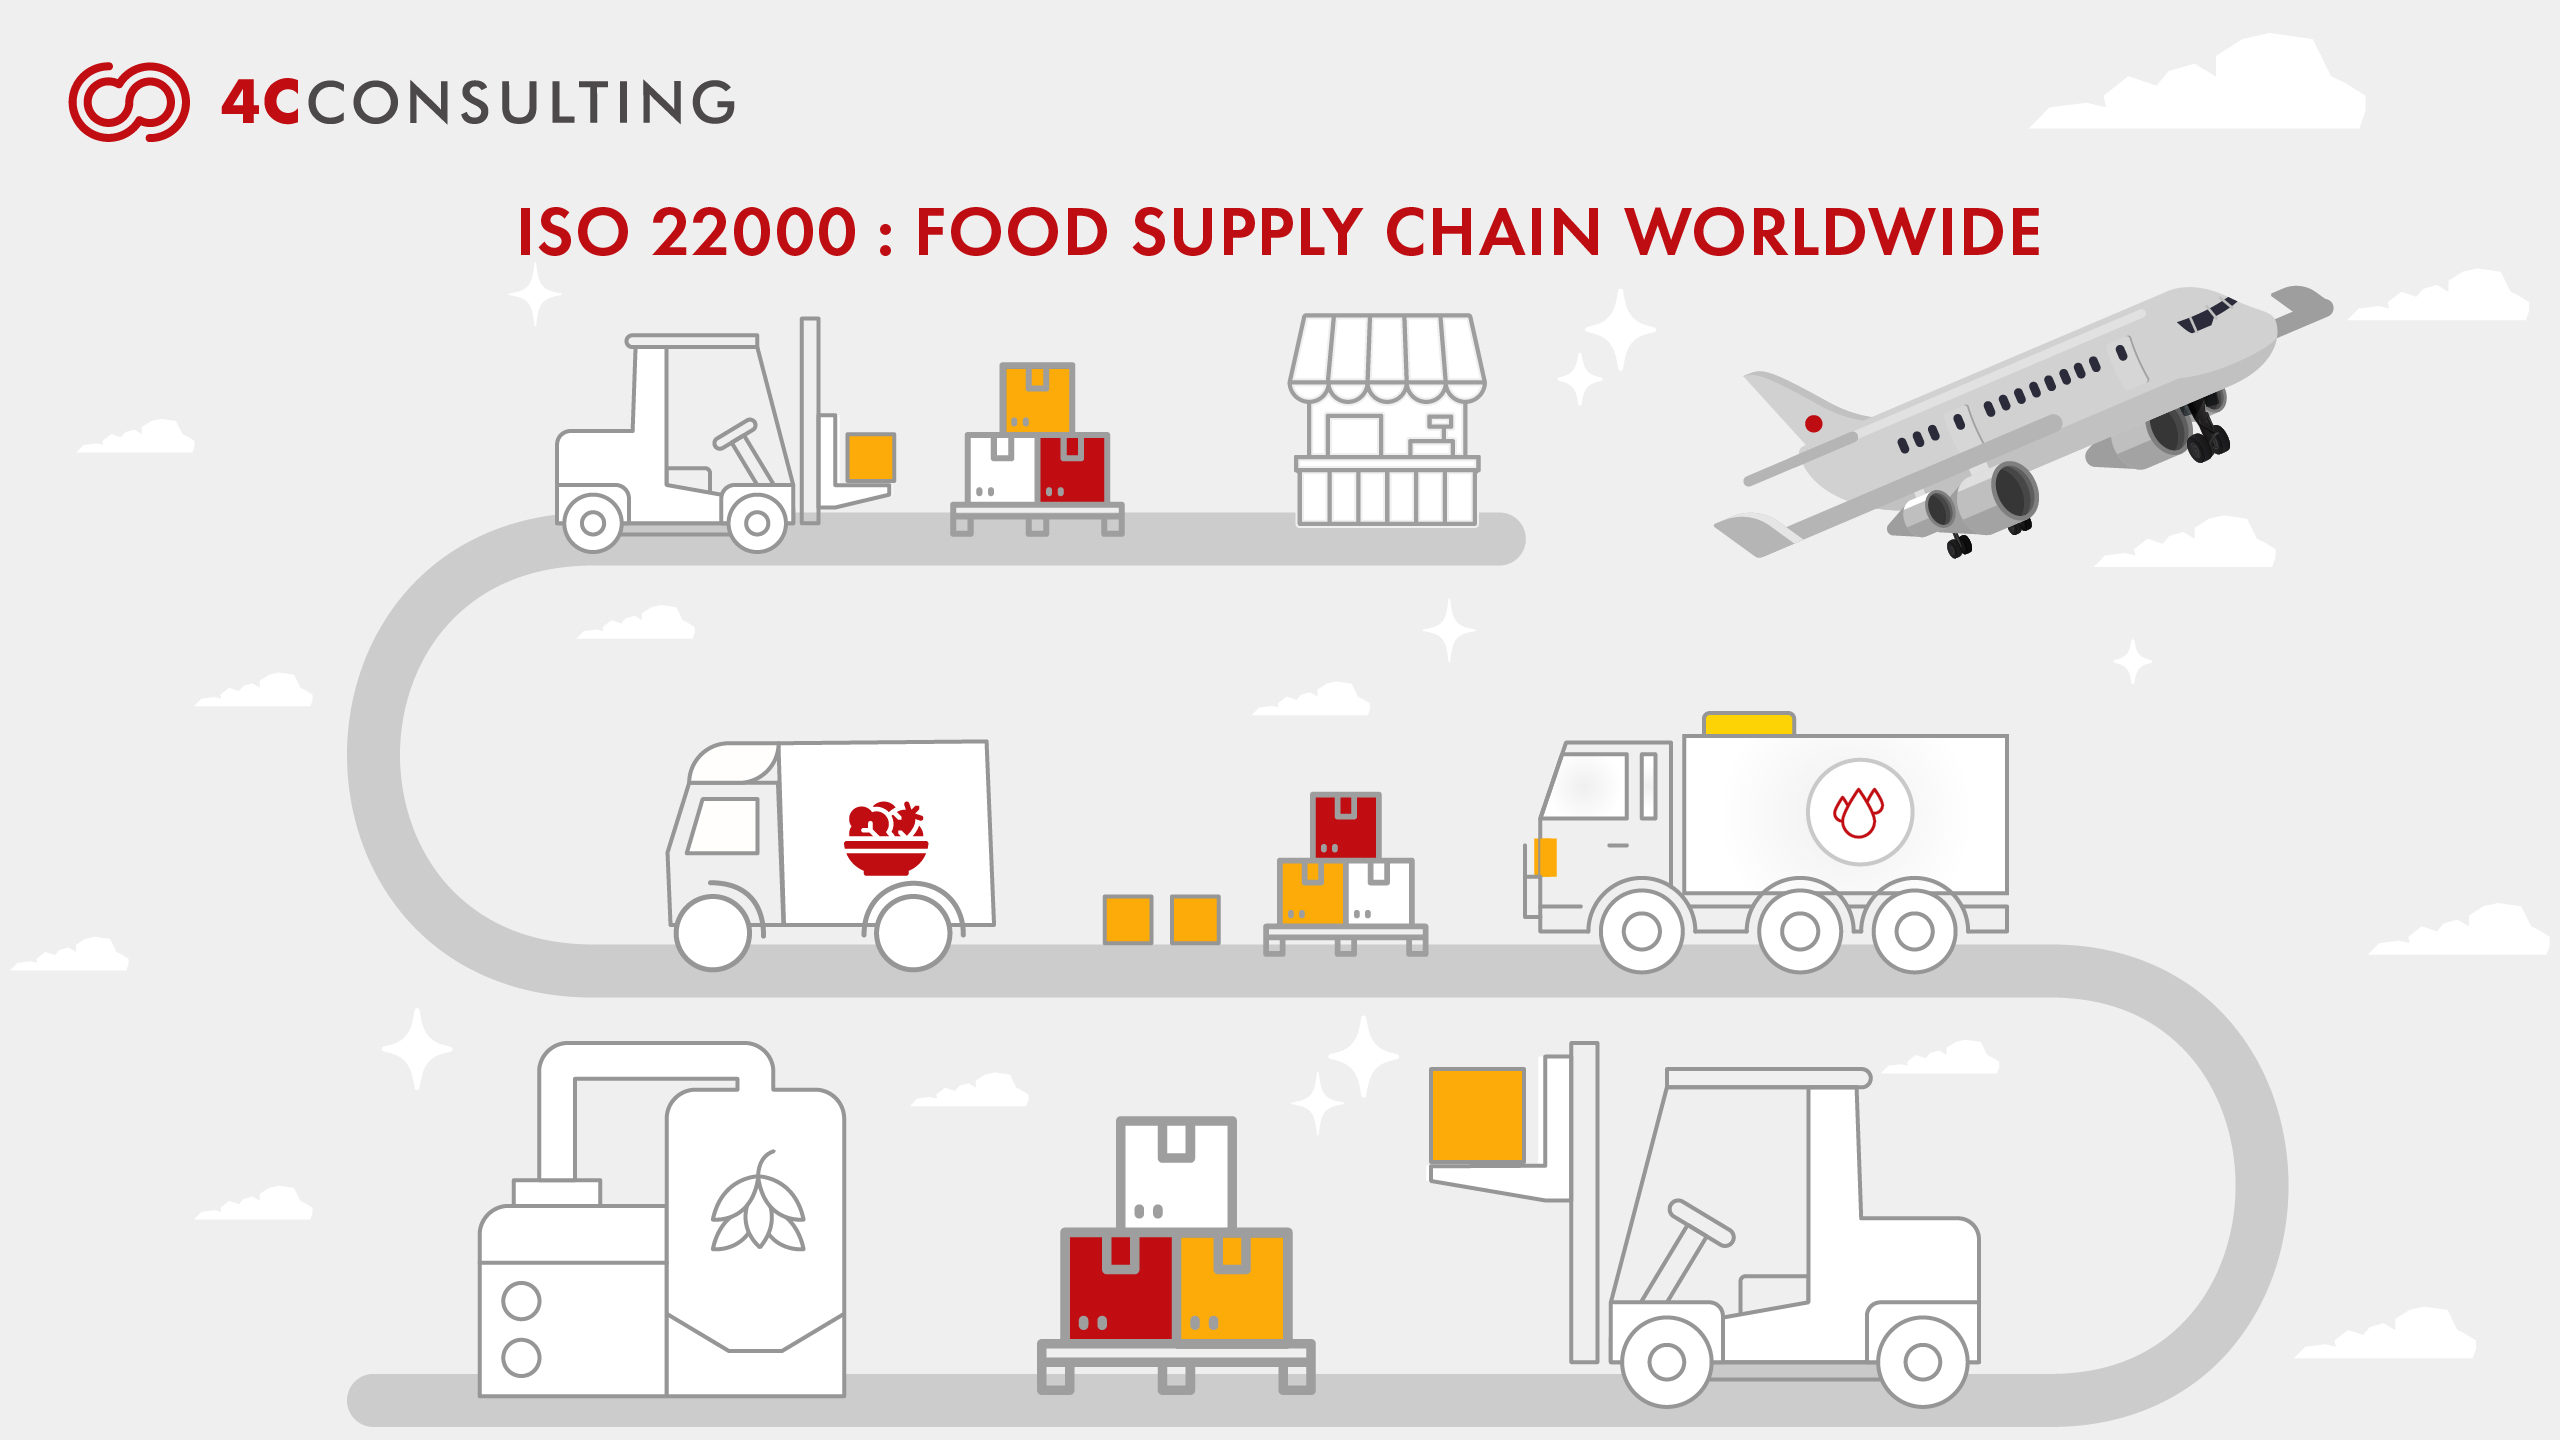 ISO 22000: SAFEGUARDING THE FOOD SUPPLY CHAIN WORLDWIDE